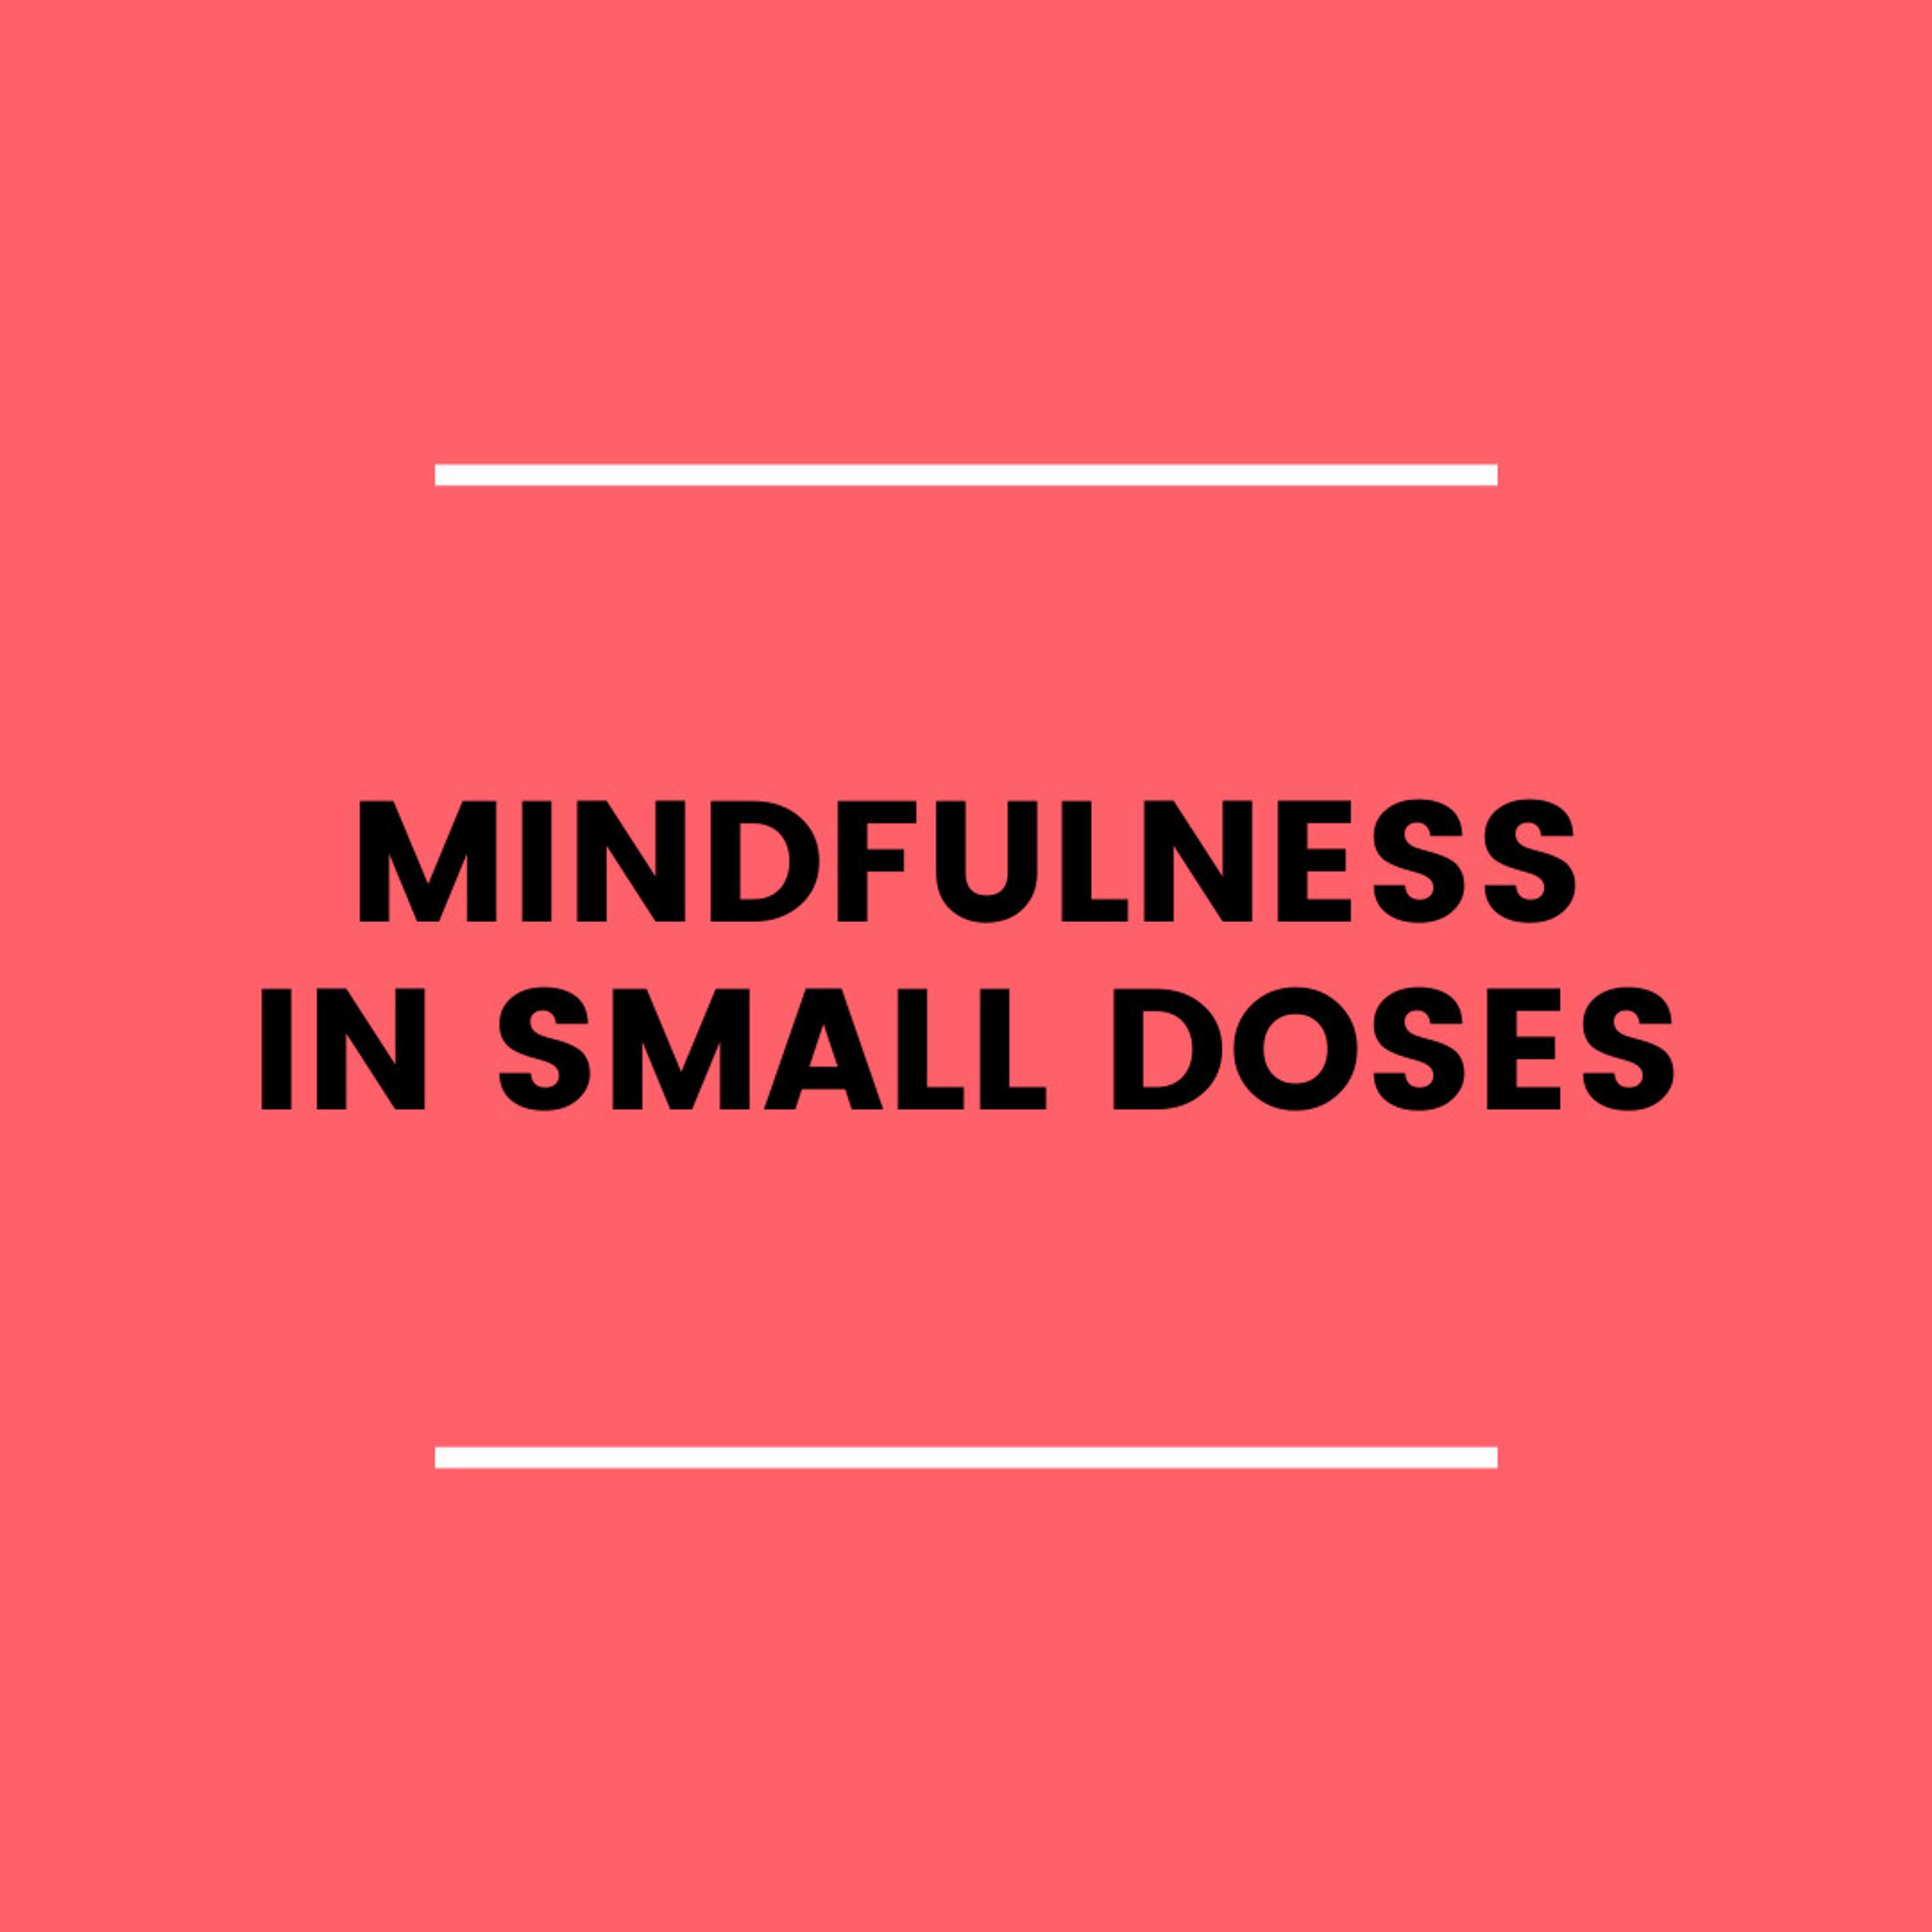 5. Mindfulness in Small Doses